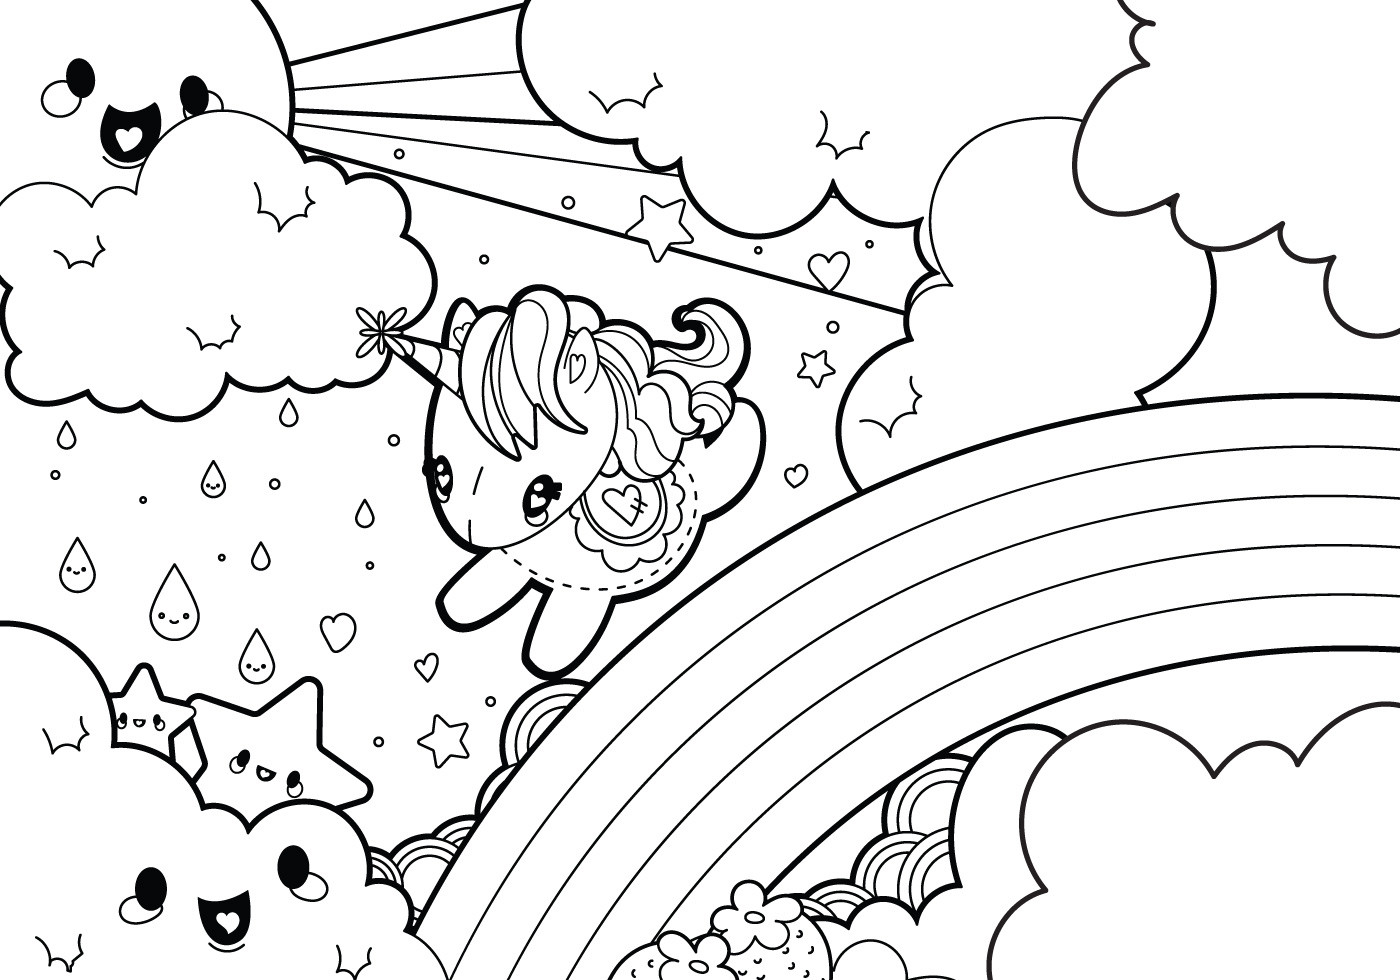 Cute Unicorn Coloring Pages For Kids
 Rainy Rainbow Unicorn Scene Coloring Page Download Free